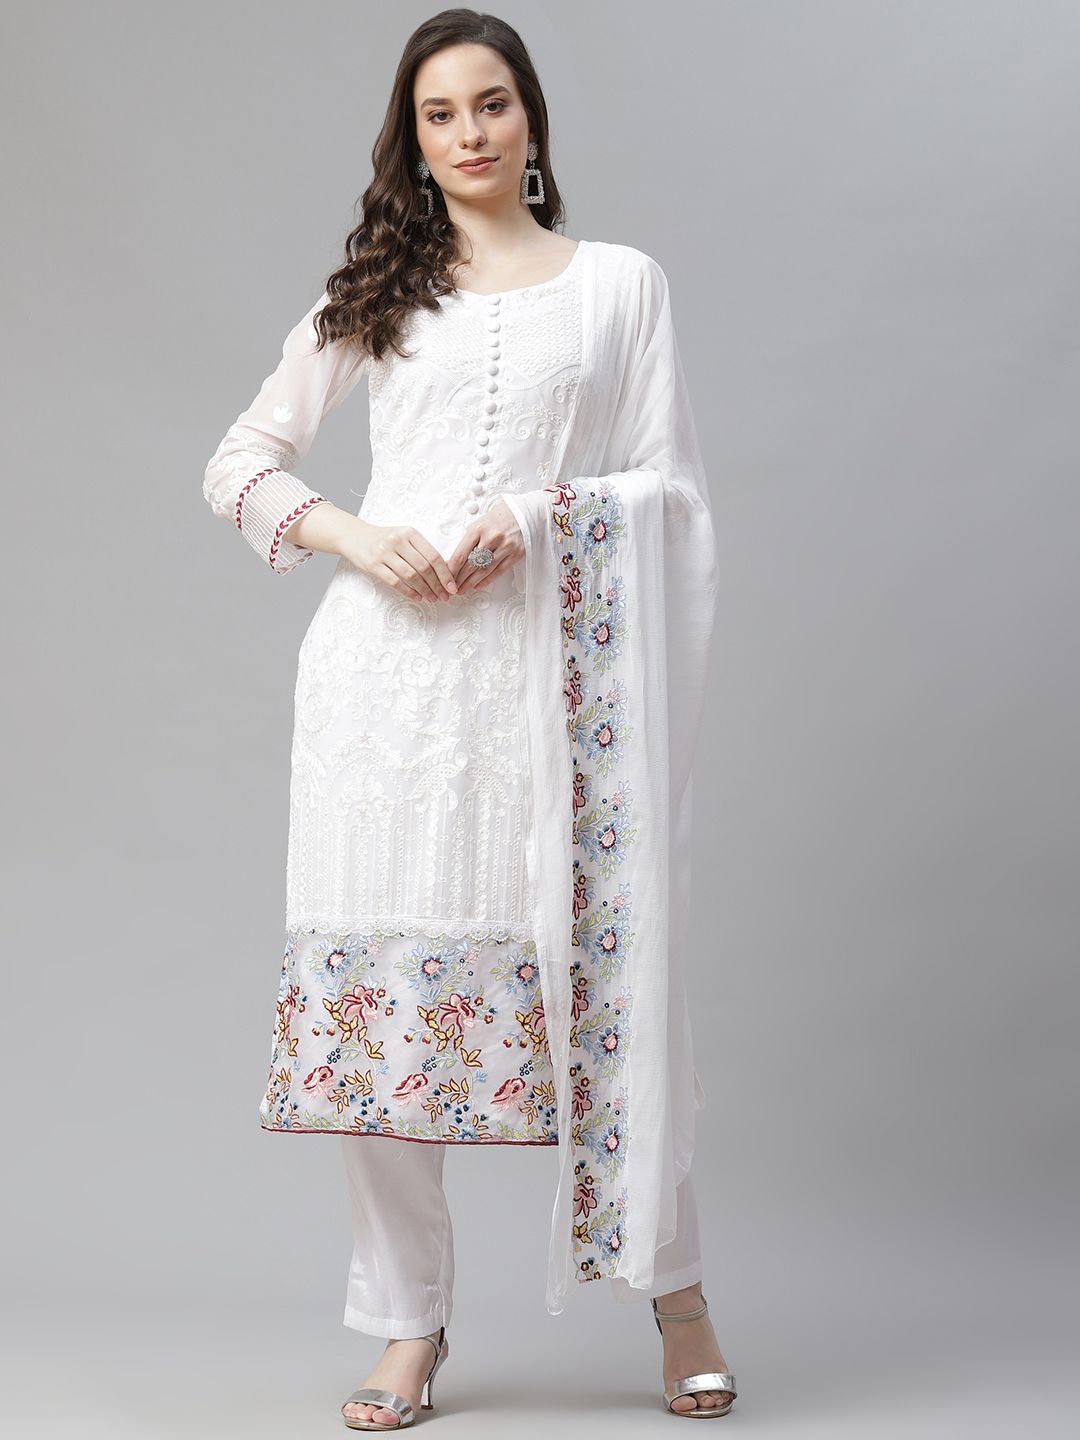 Readiprint Fashions White Embroidered Unstitched Dress Material Price in India